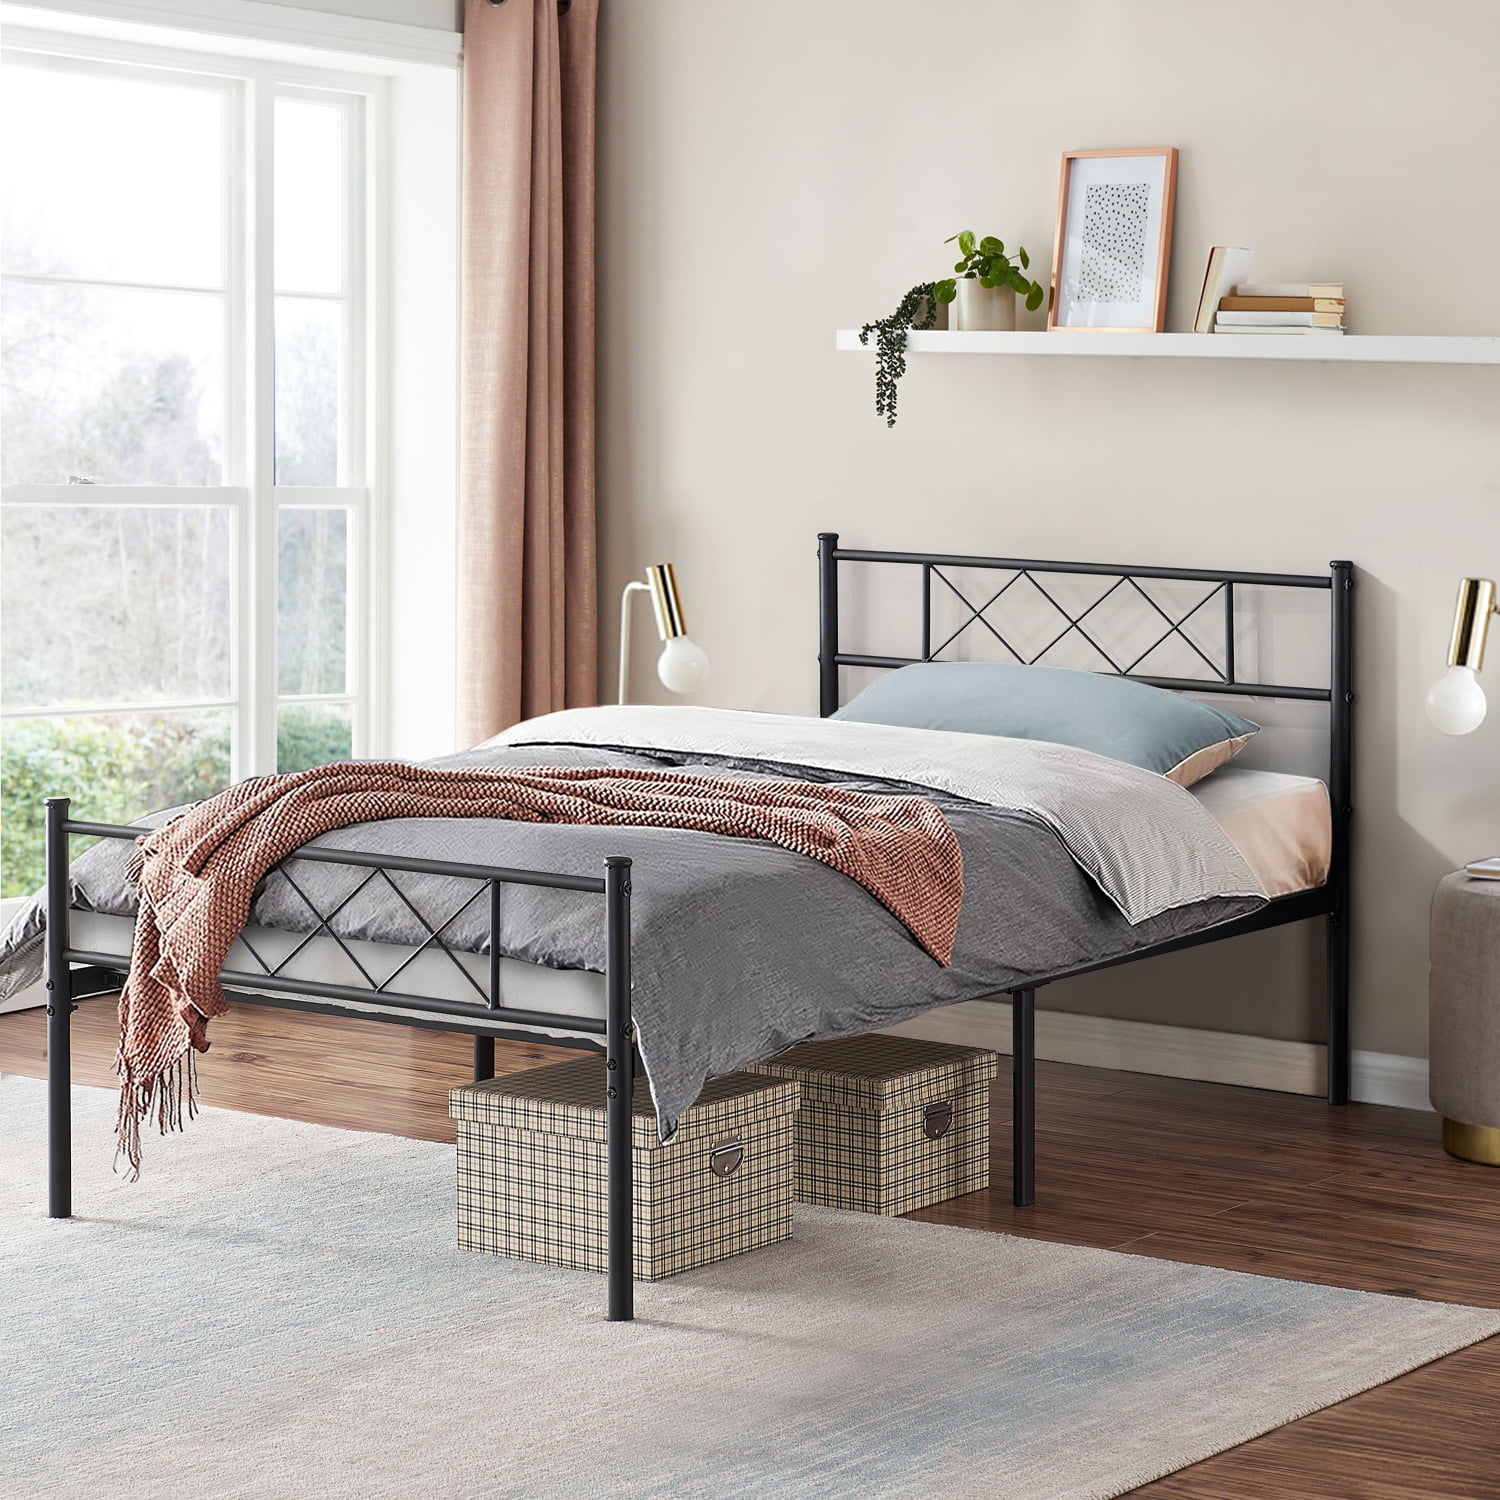 Twin Size Metal Platform Bed Frame With, King Bed Frame With Under Storage